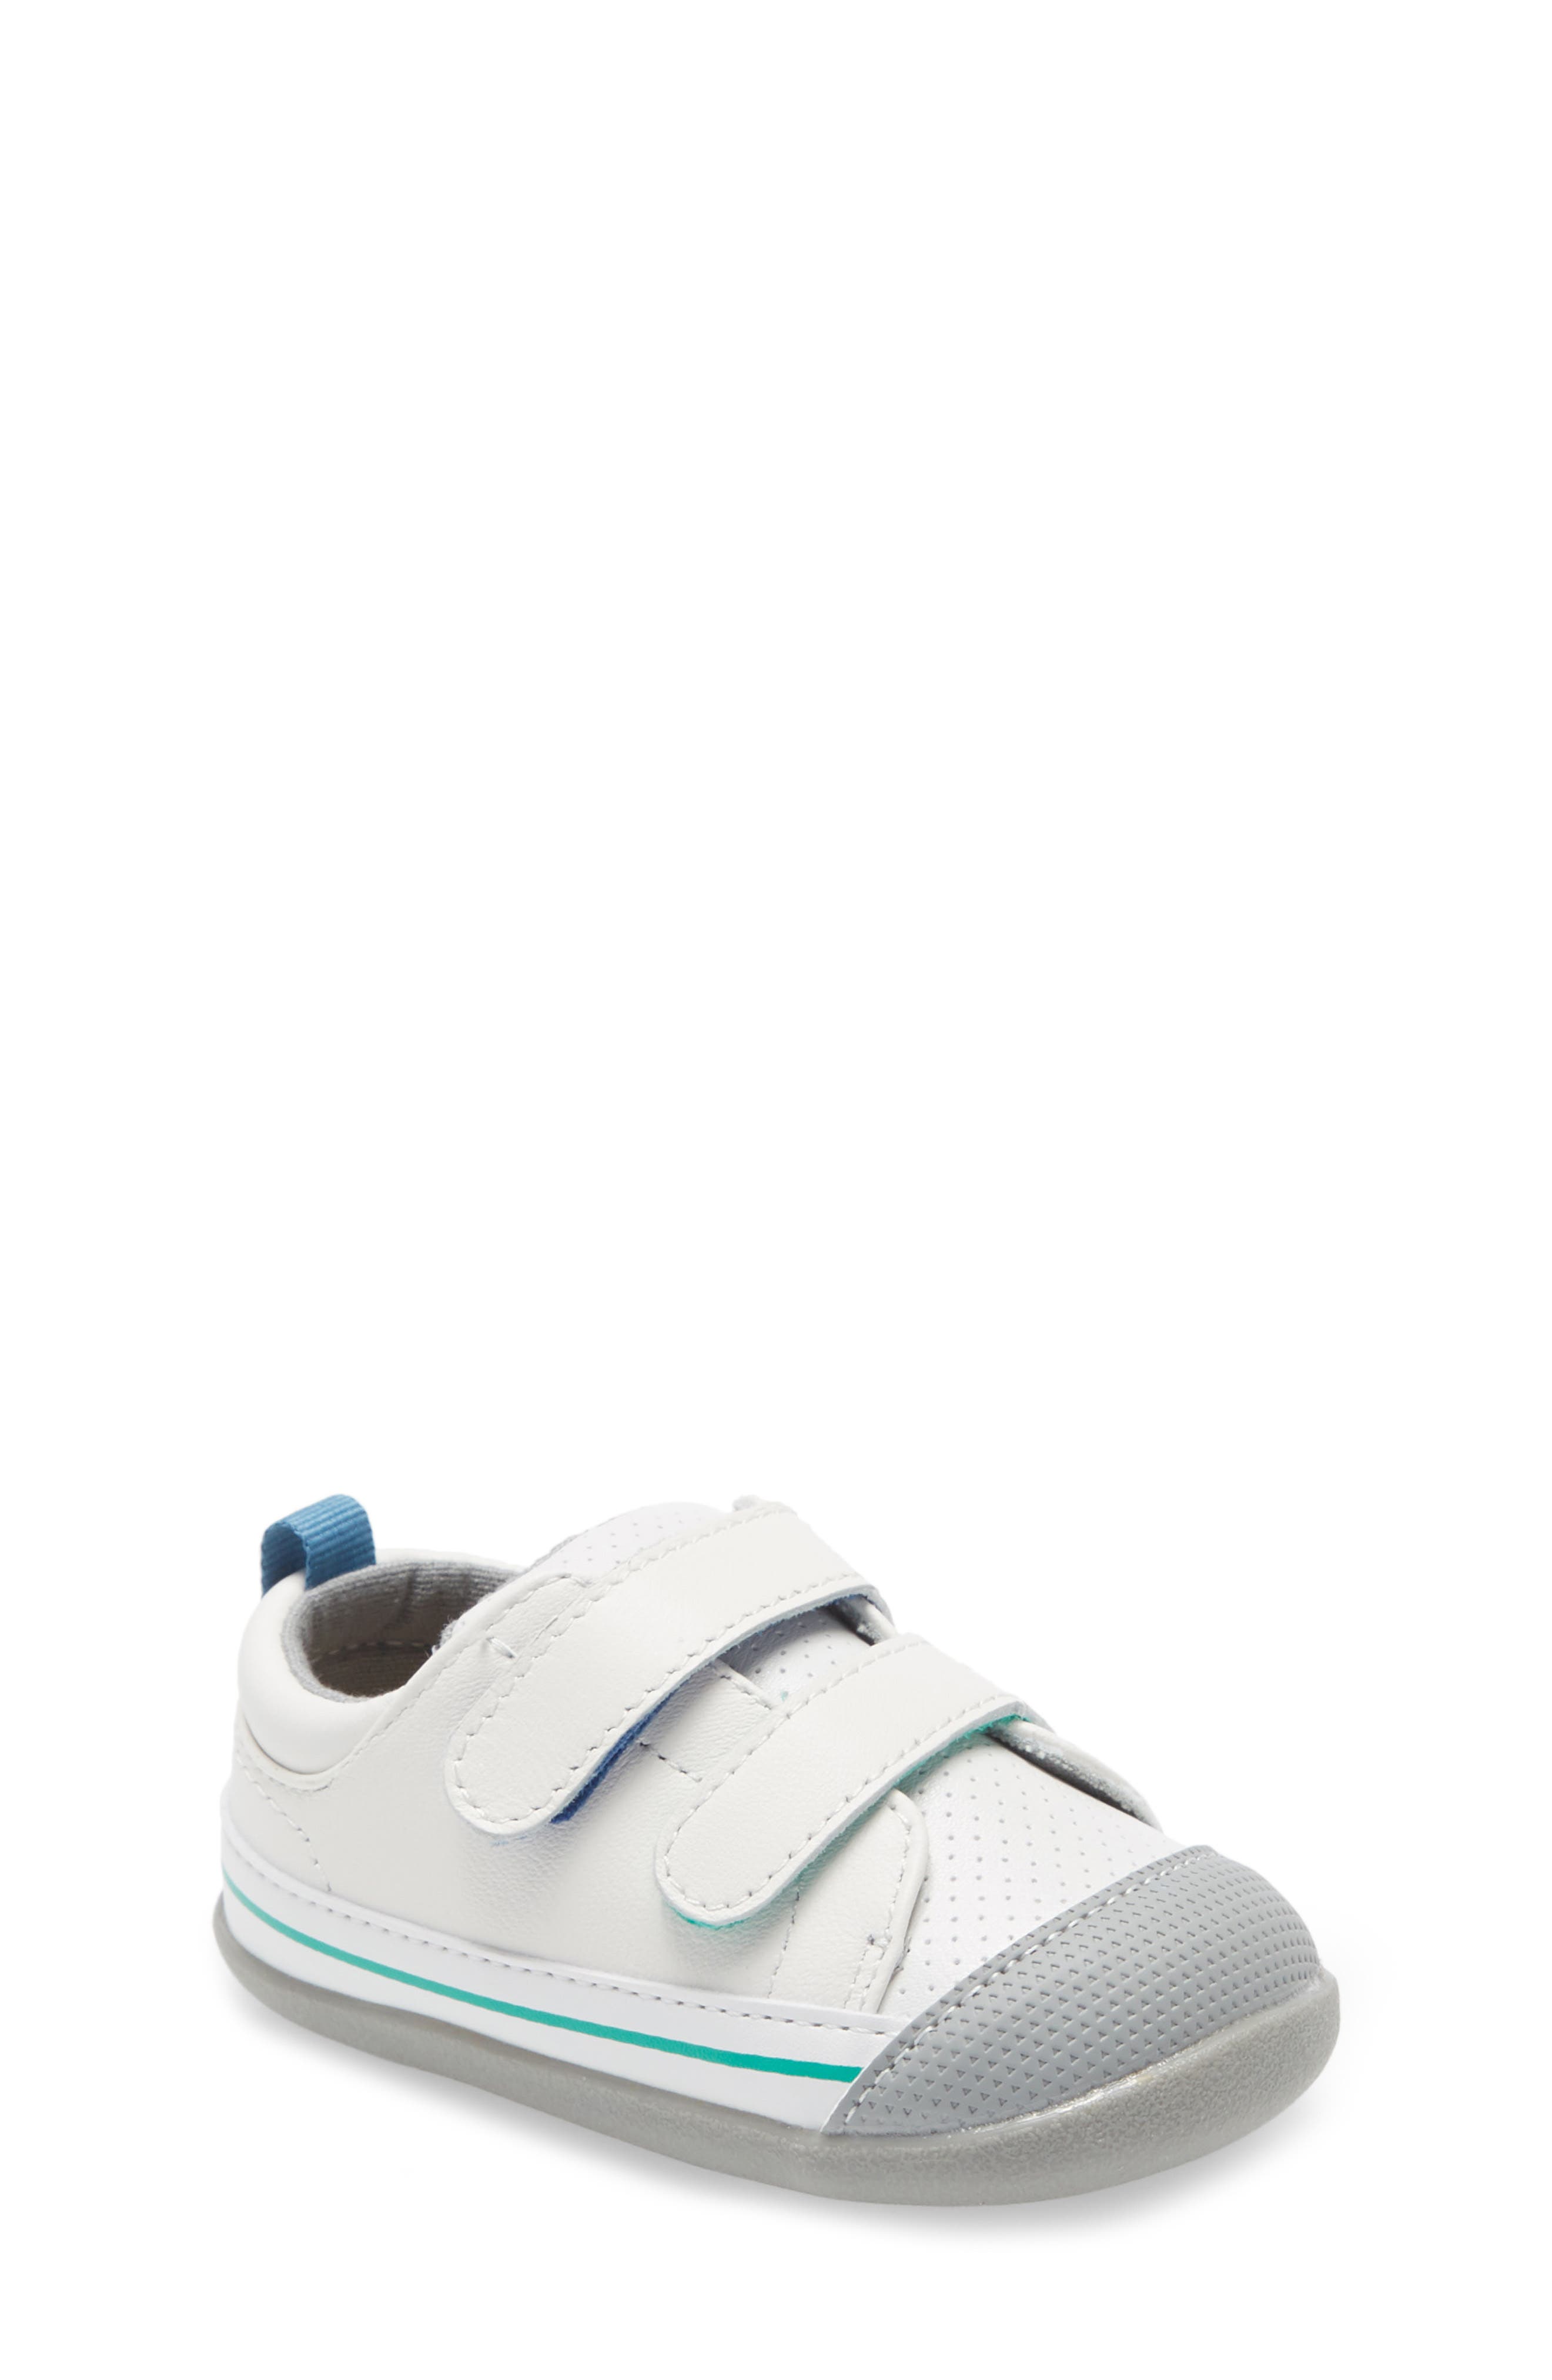 best baby shoes for new walkers